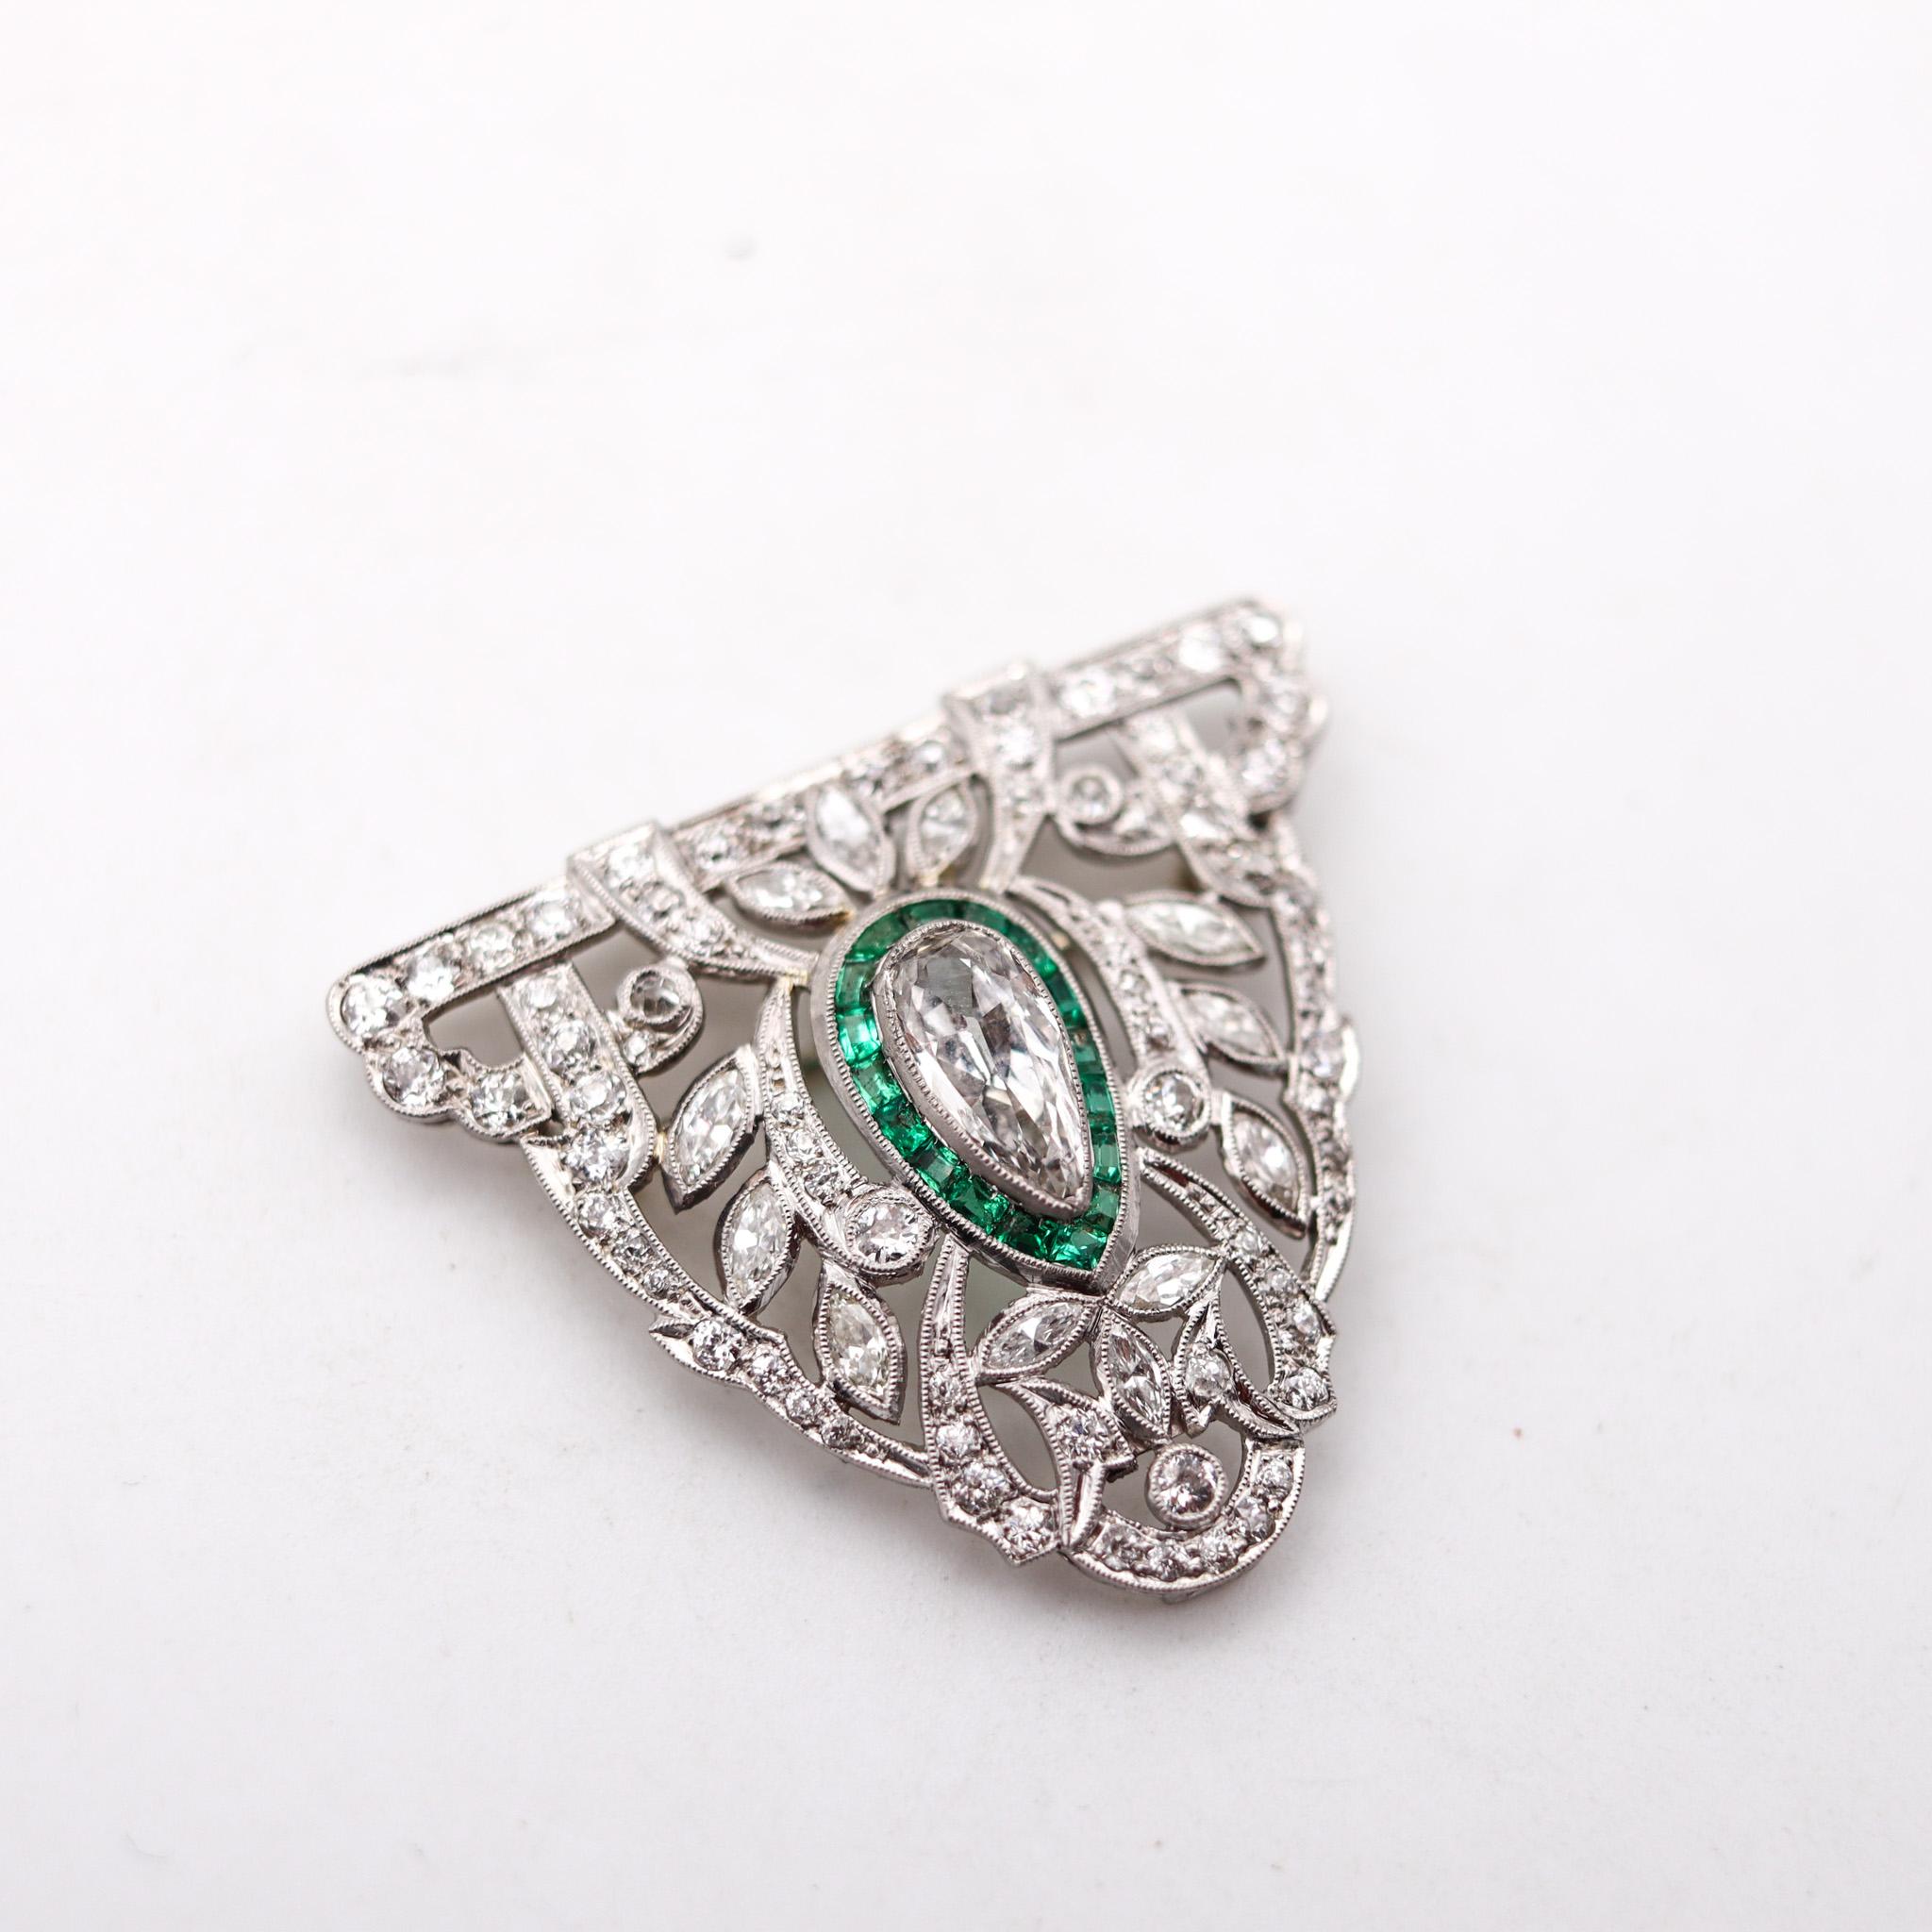 Art Deco 1930 Pendant Brooch In Platinum With 5.01 Ctw In Diamonds And Emeralds In Excellent Condition For Sale In Miami, FL